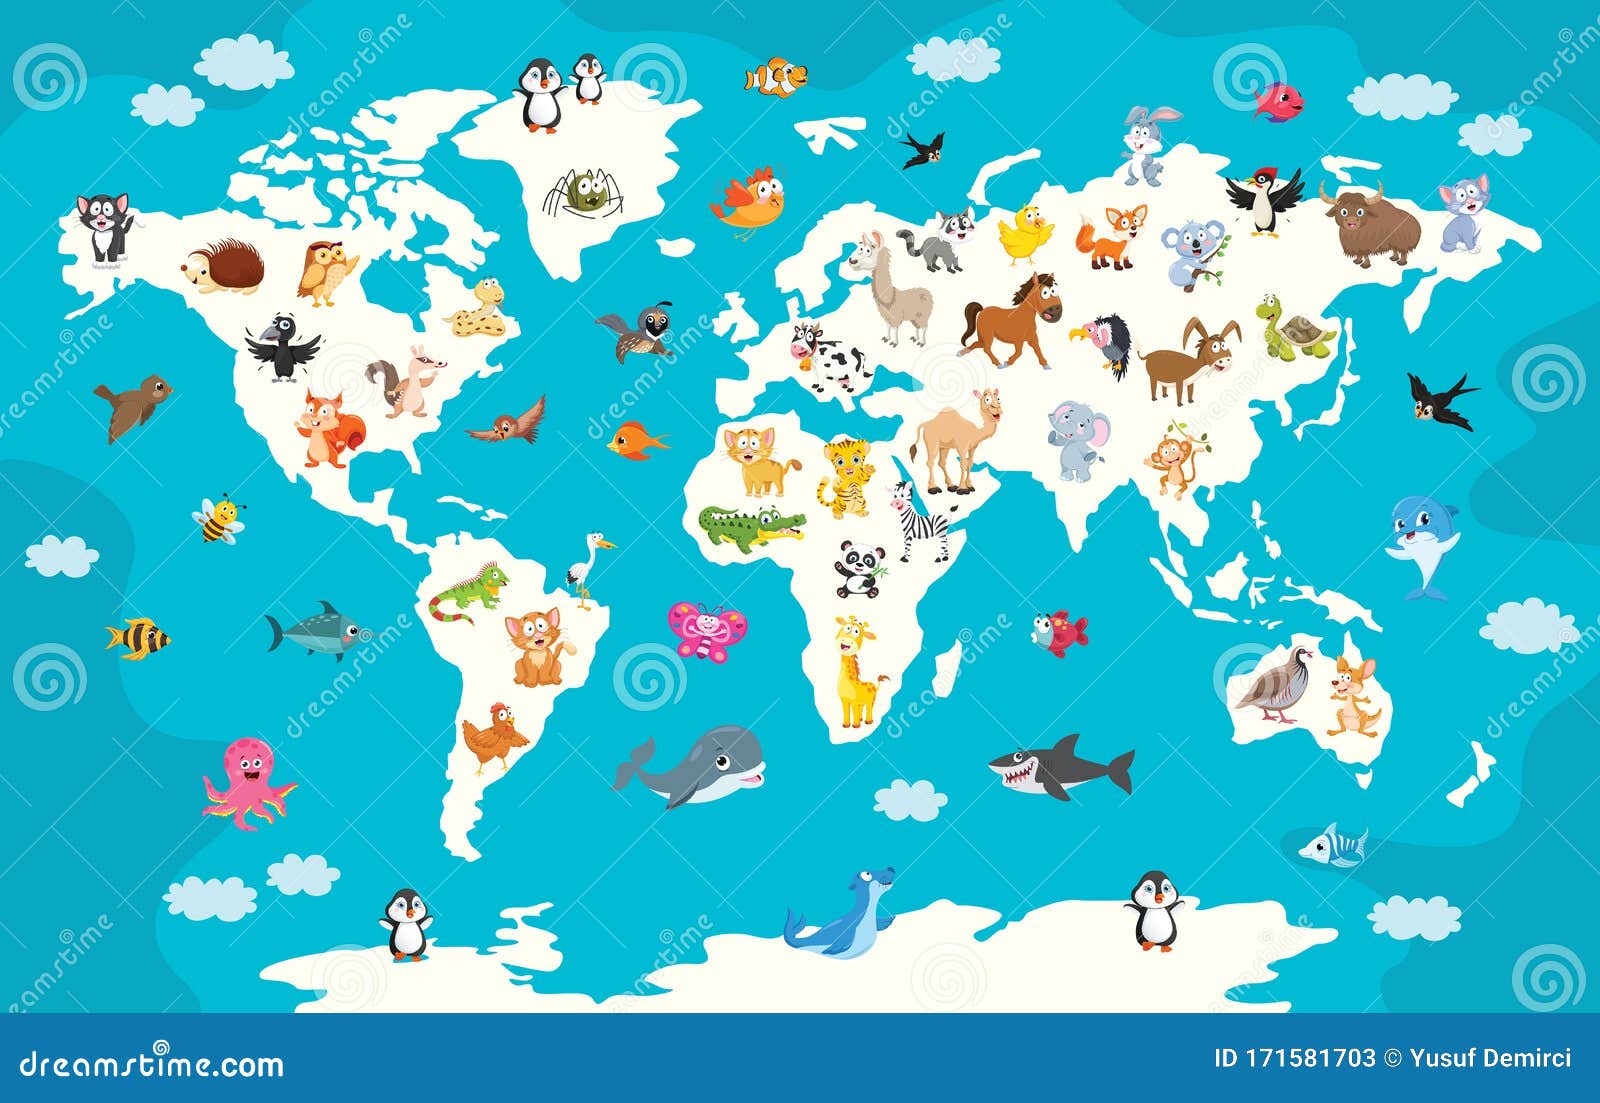 World Map with Cartoon Animals Stock Vector - Illustration of ecosystem,  geography: 171581703